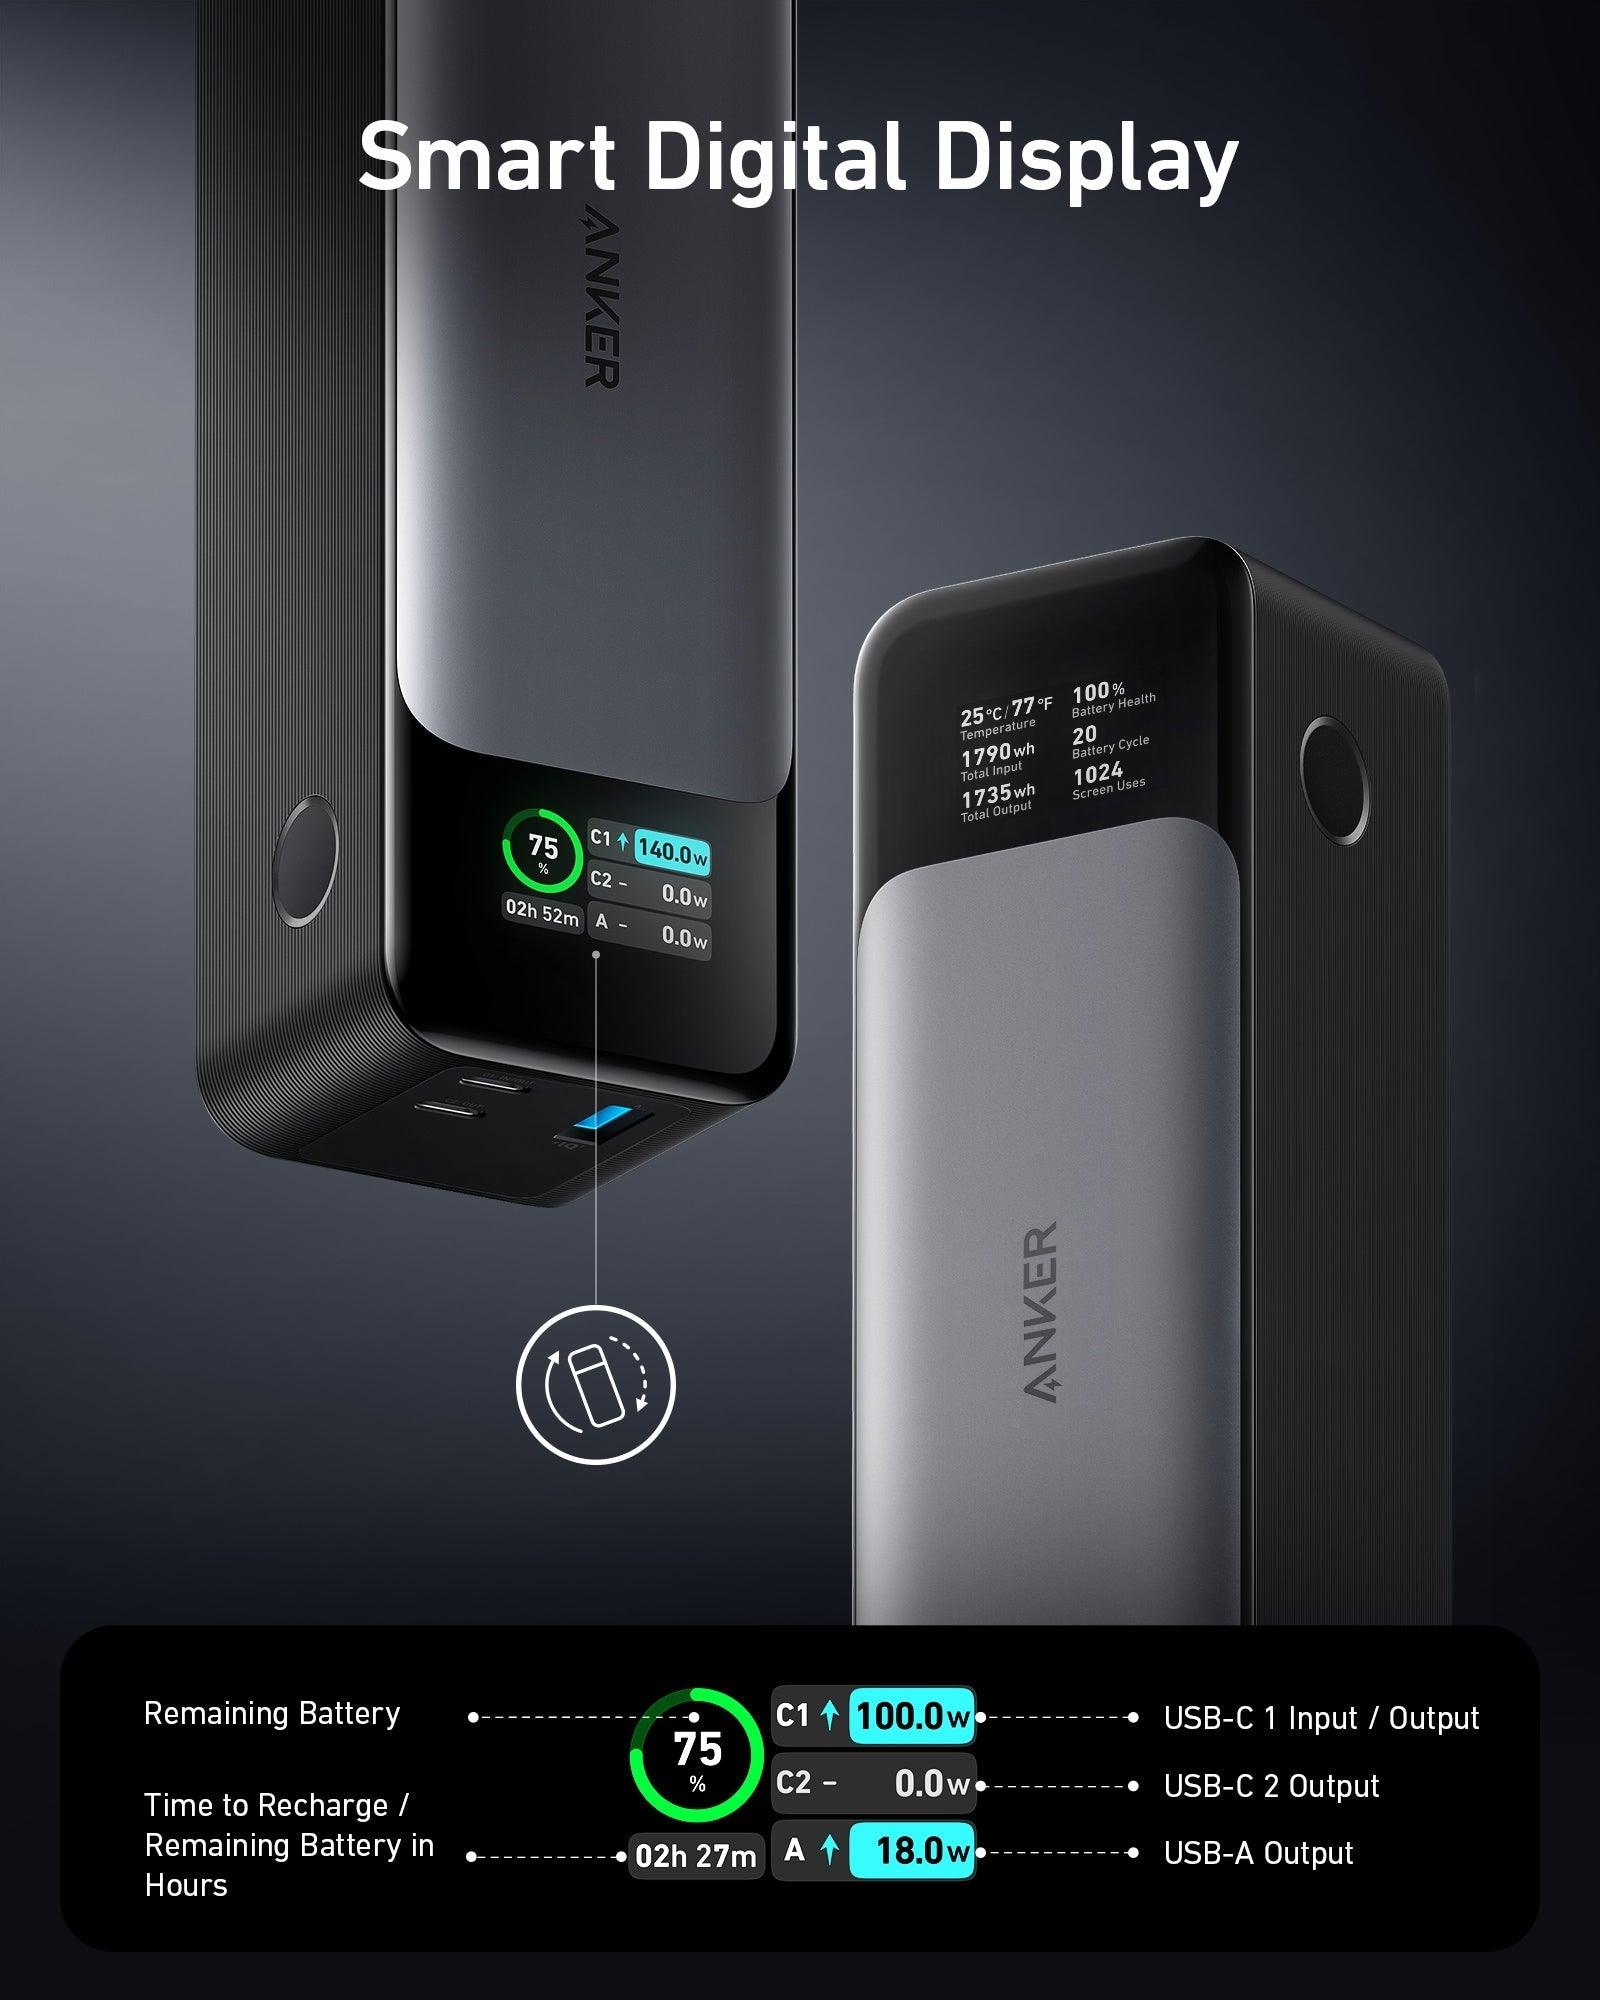 Anker 737 Power Bank (PowerCore 24K) 24000mAh, 140W, 3-port Portable Charger - Anker 737 Power Bank (PowerCore 24K) 24000mAh, 140W, 3-port Portable Charger - undefined Ennap.com